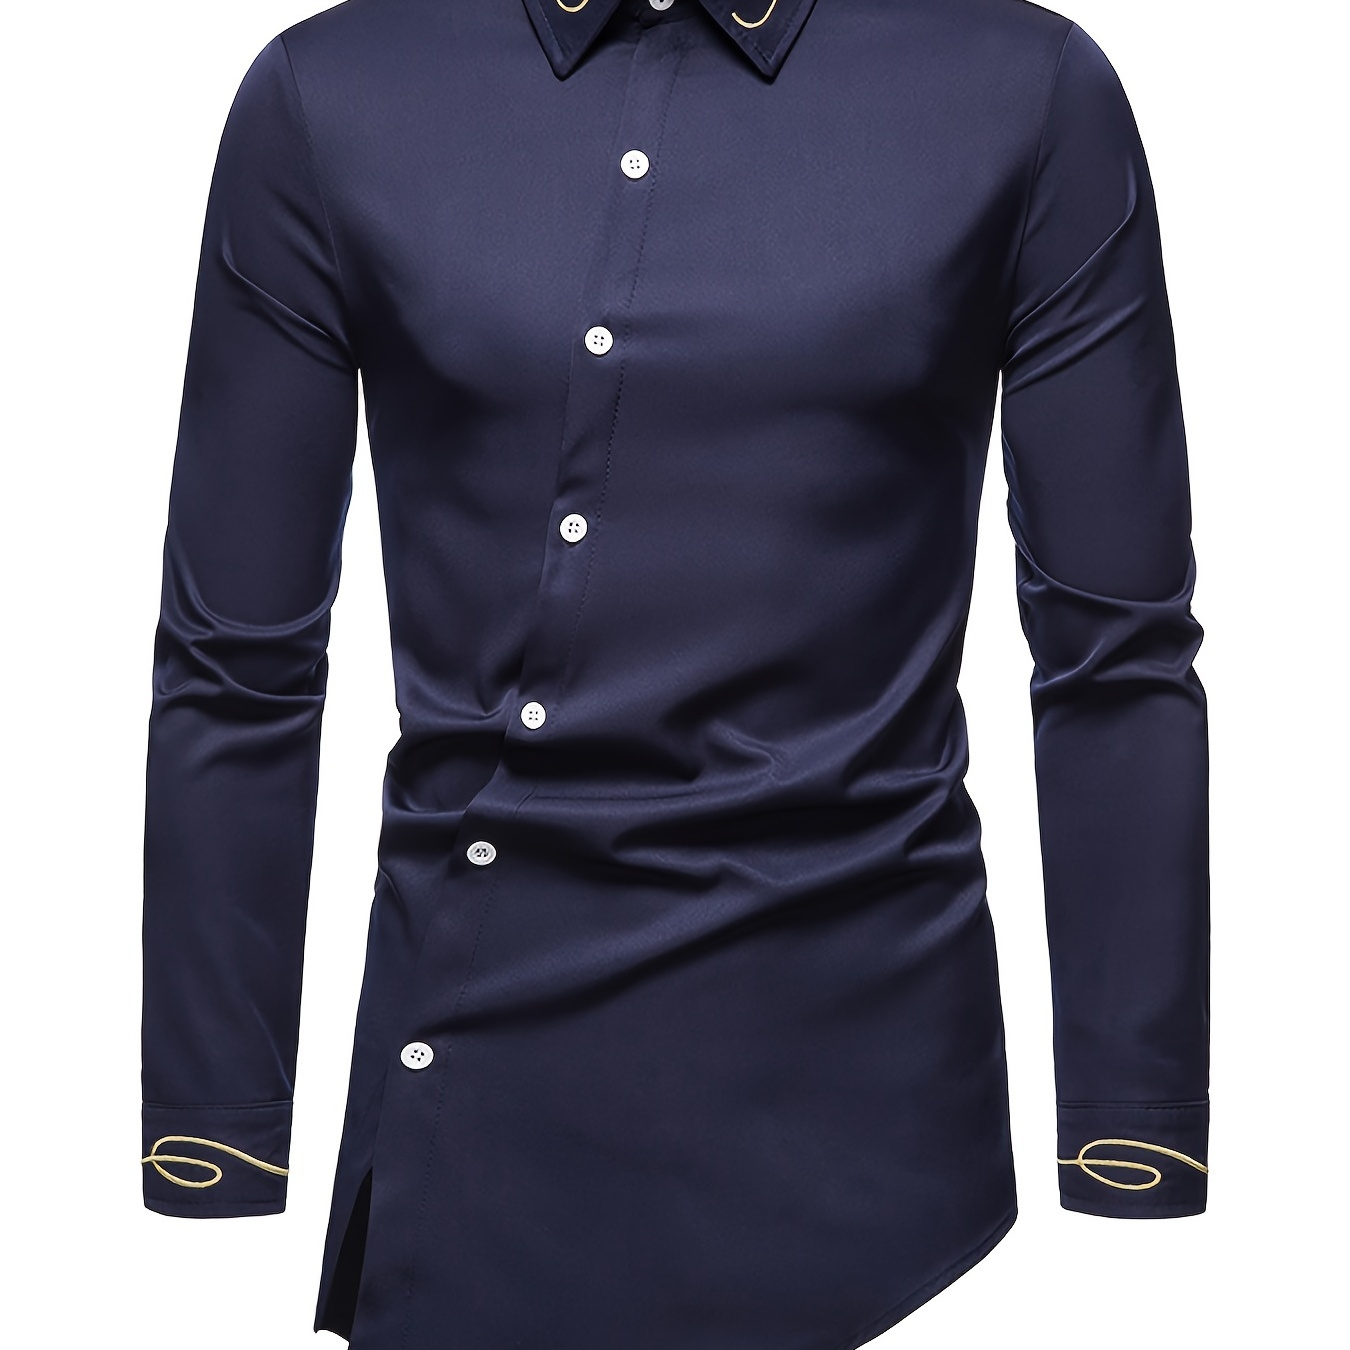 Men's Dress Shirt Slim Fit Long Sleeve Shirts, Embroidery Casual Top ...